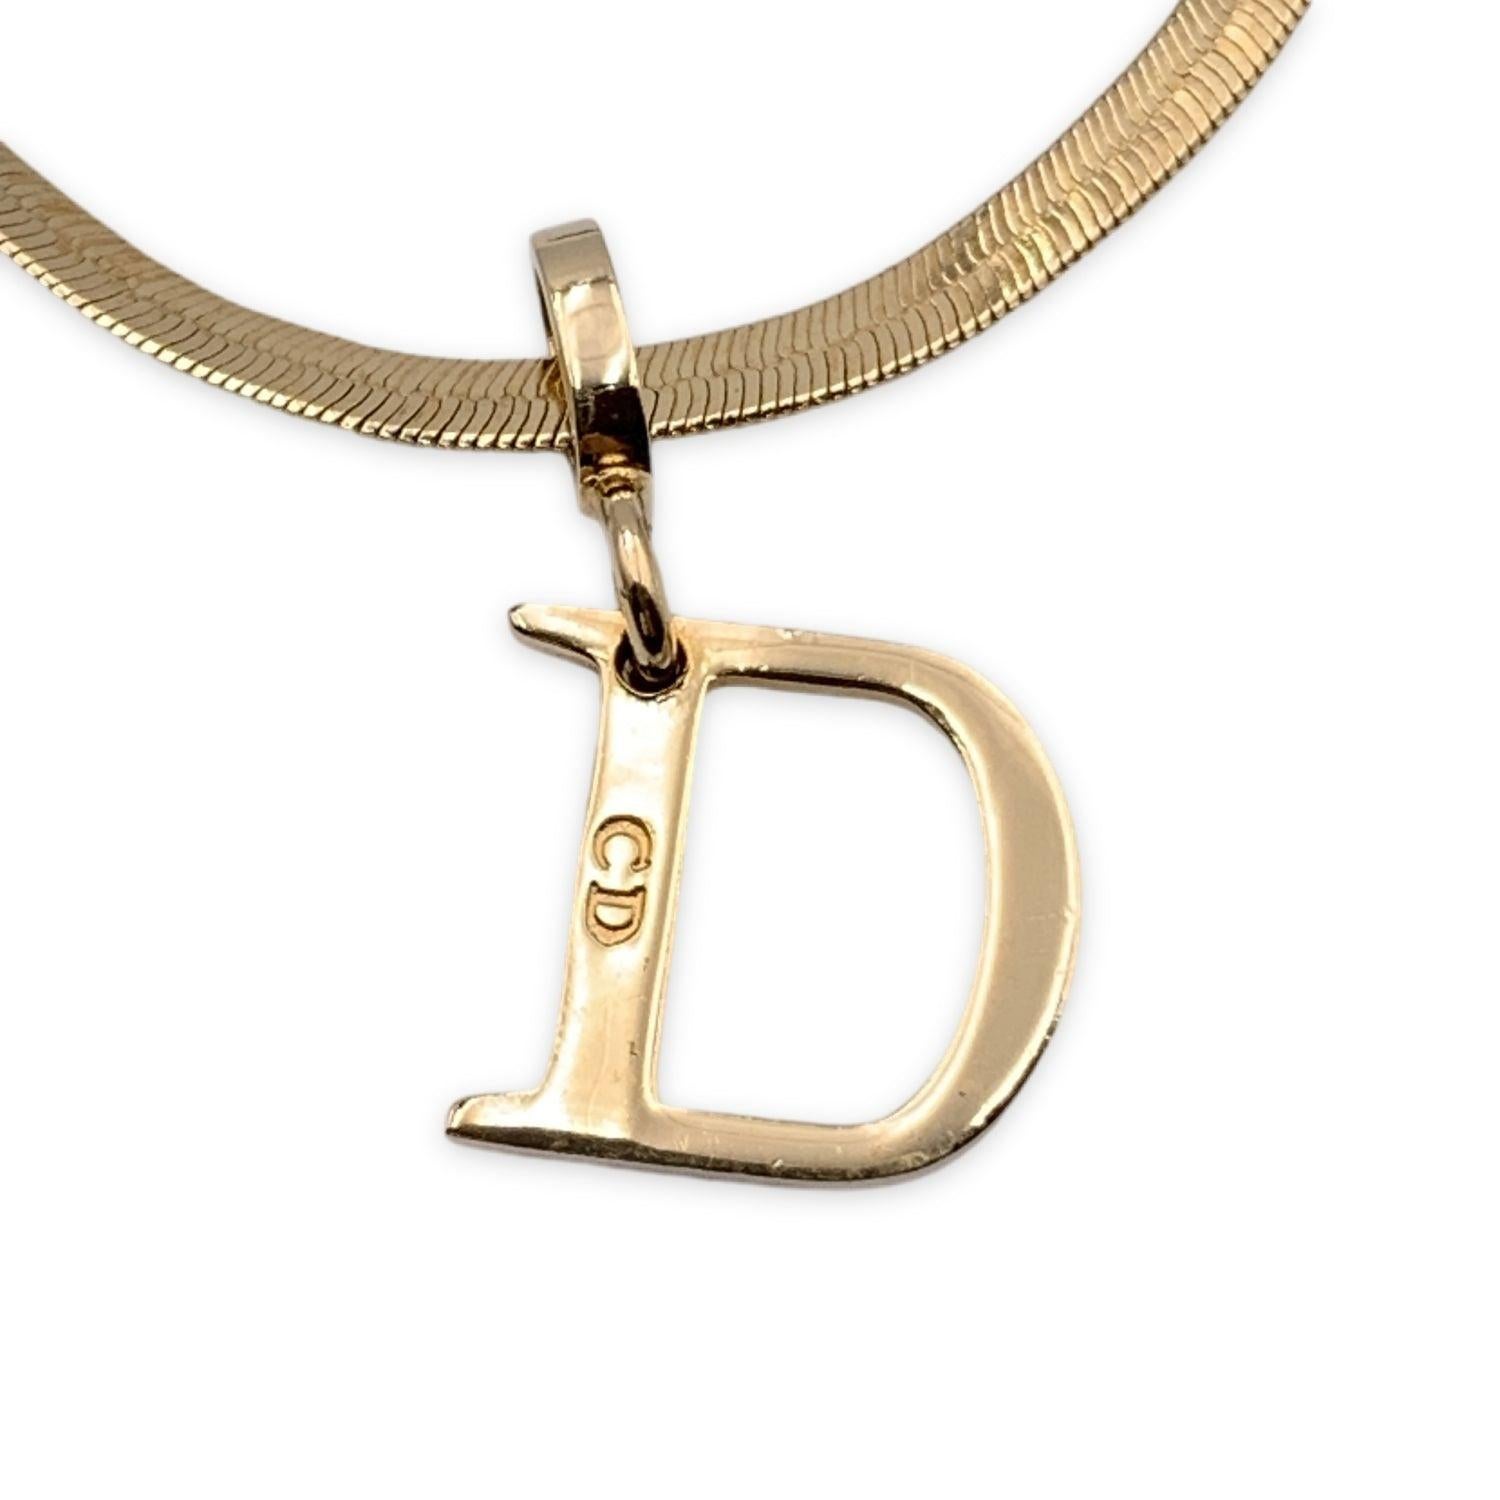 Vintage Christian Dior snake gold metal bracelet with D letter pendant charm. Lobster closure. Small CD - Dior charm at the end of the bracelet. Max chain length: about 7 inches - 17.7 cm Condition A - EXCELLENT Gently used. Please, look carefully